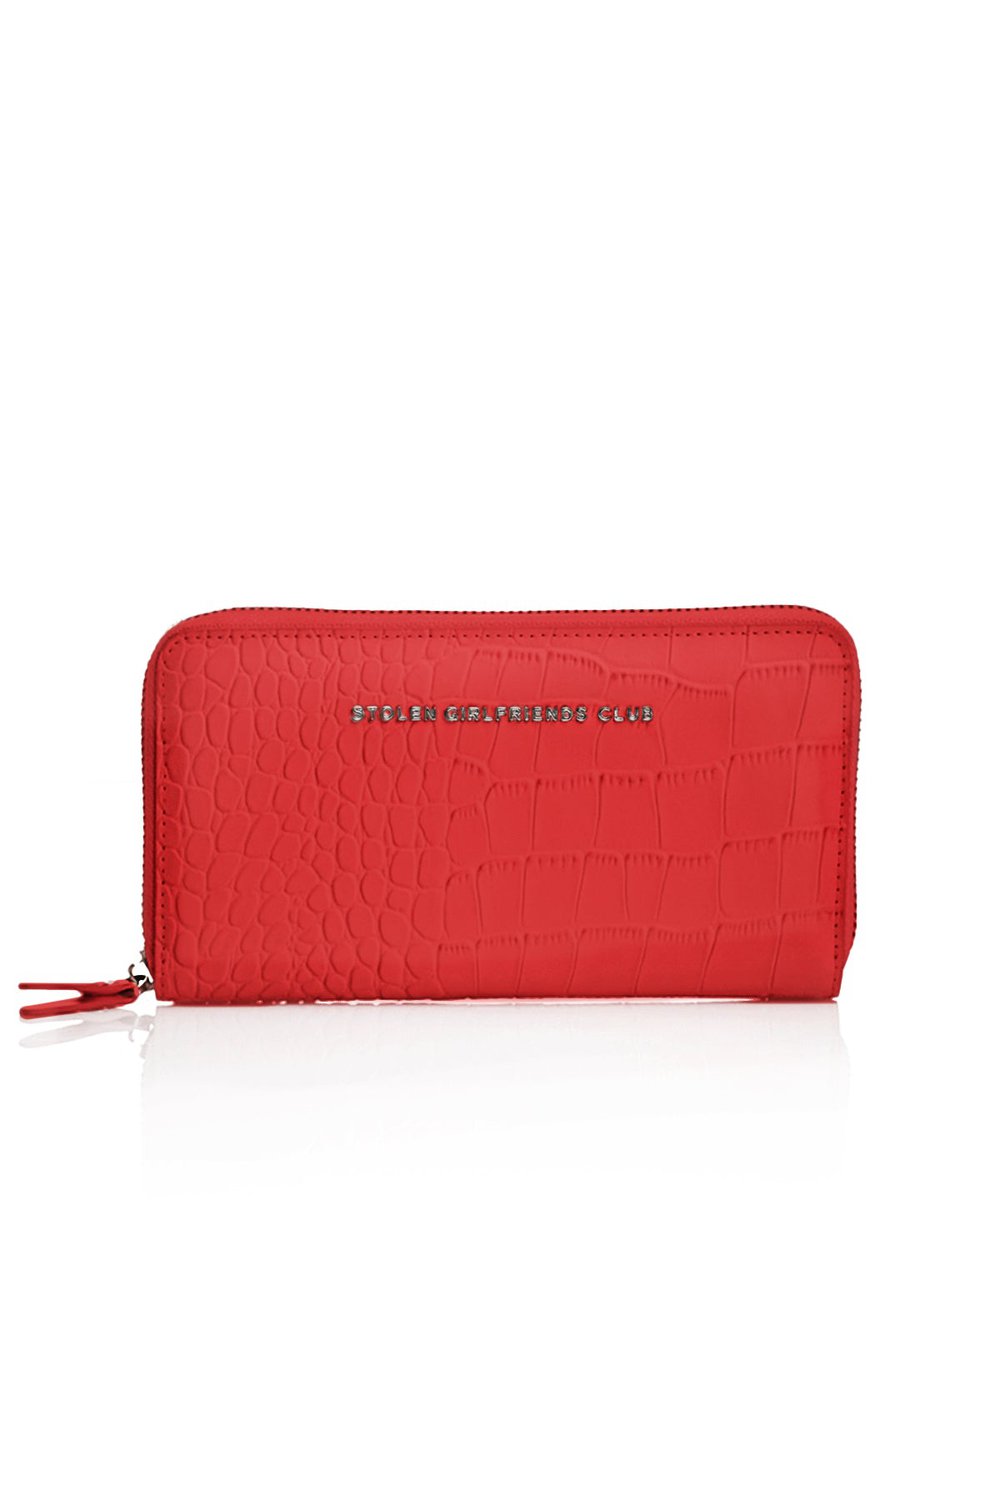 Big Trouble Wallet - Cherry Red_0